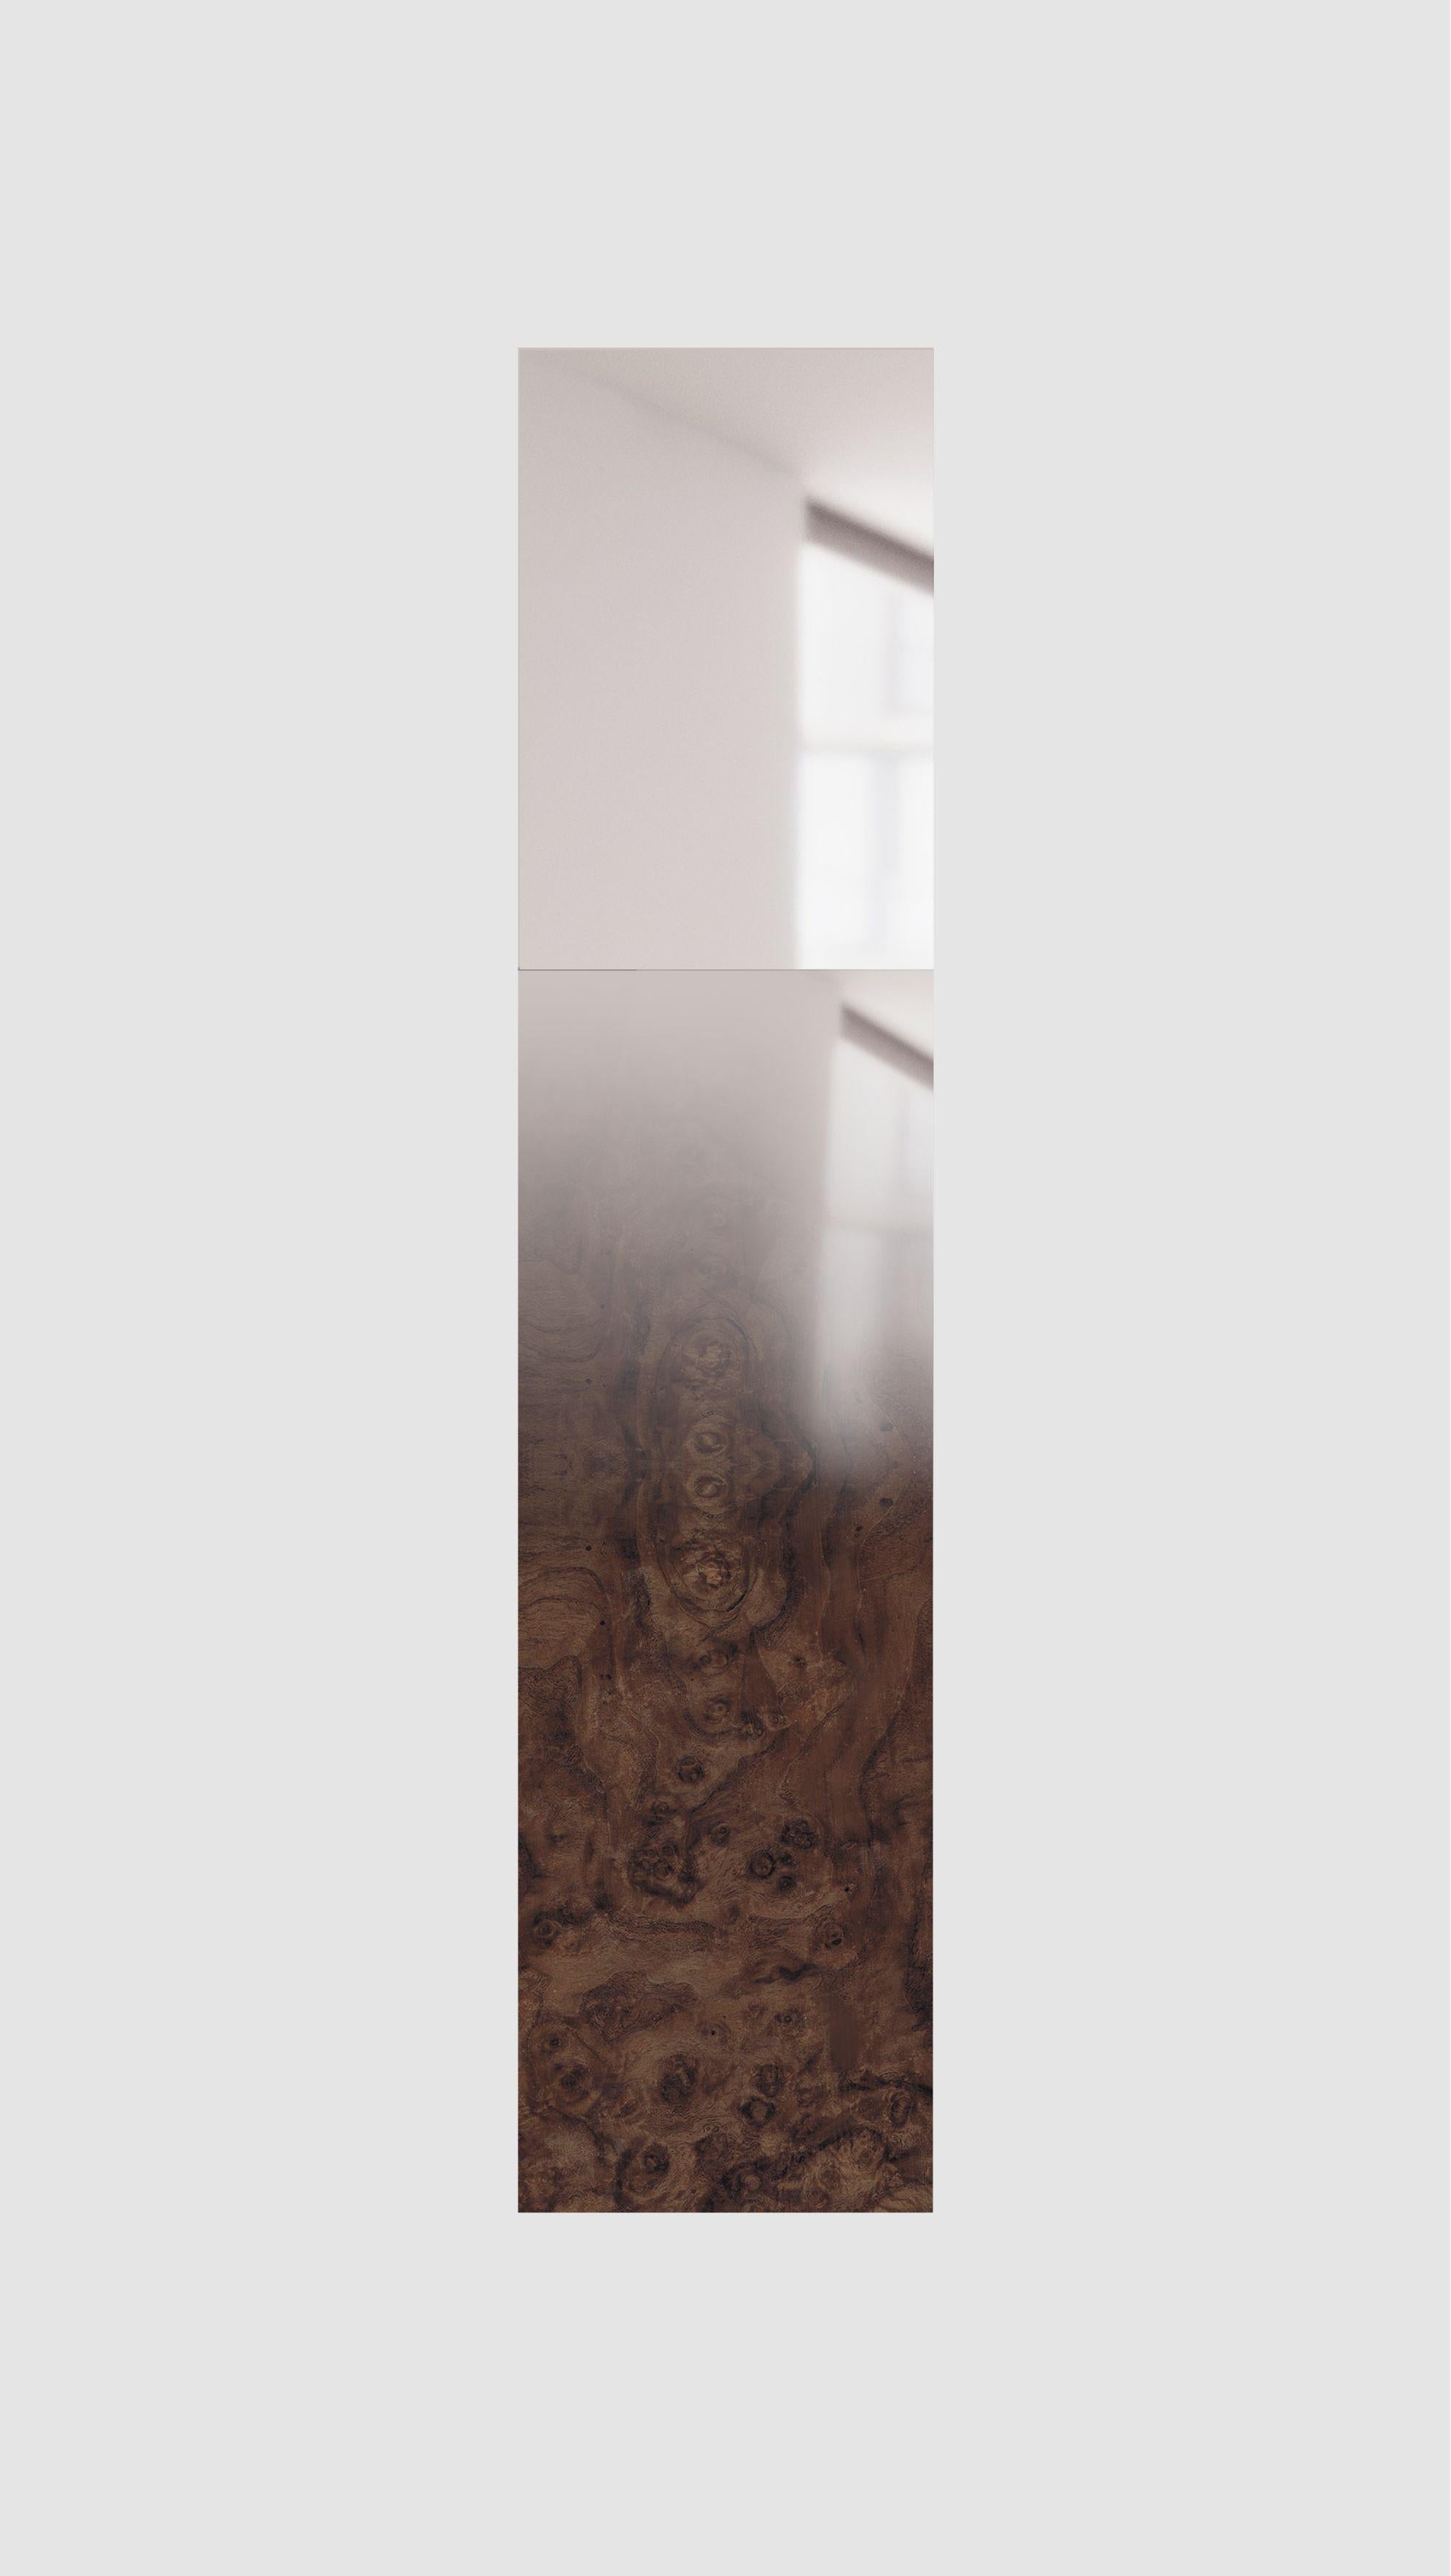 Fading wood mirror by Formaminima.
Limited edition.
Dimensions: 14 x 35 x H 157.5 cm.
Materials: Walnut briarwood blend with grey hand-ground crystal layering, fading mirror finish applied by hand.
Flush wall metal bracket.

The Mirror/Zero